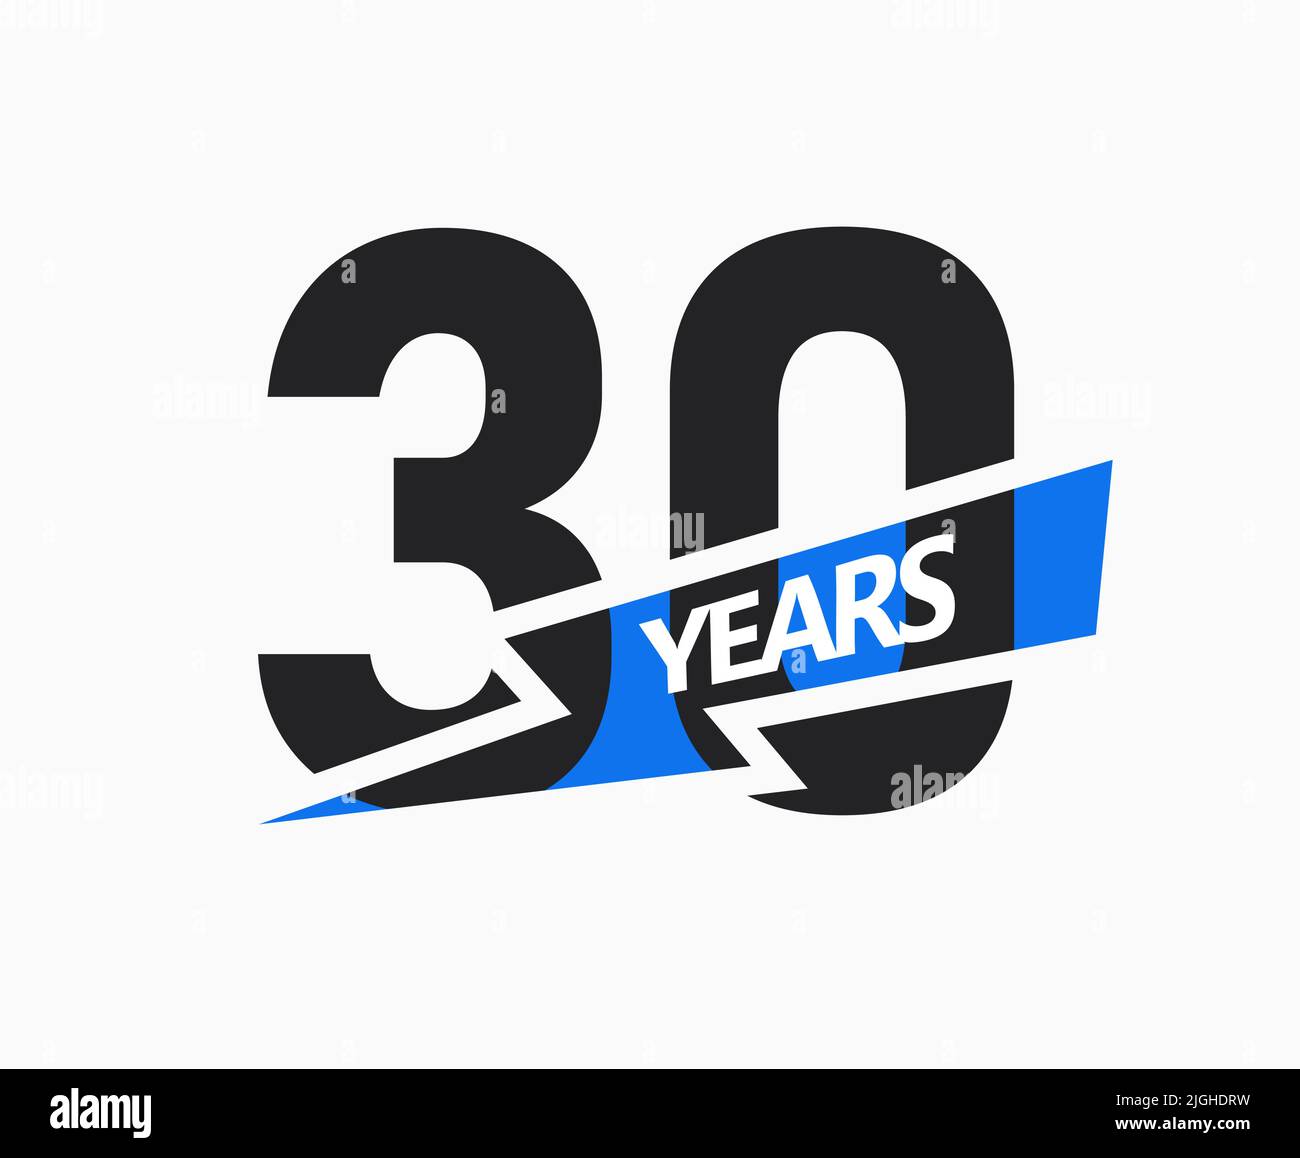 30 years of business, jubilee logo. 30th Anniversary sign. Modern graphic design for company birthday. Isolated vector illustration. Stock Vector